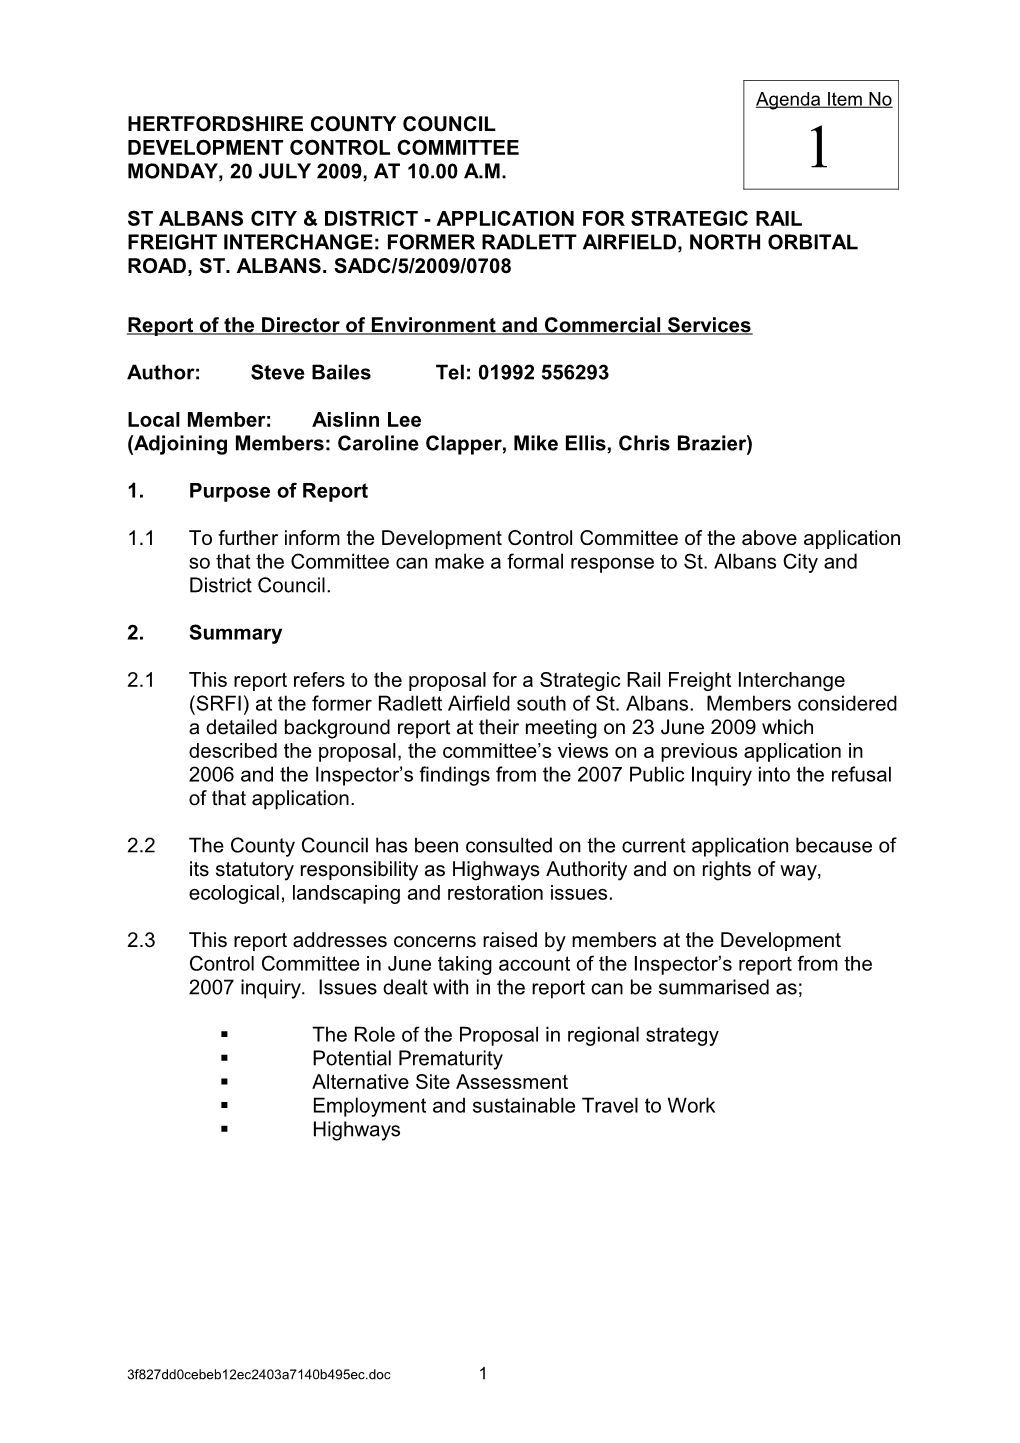 Report of the Director of Environment and Commercial Services